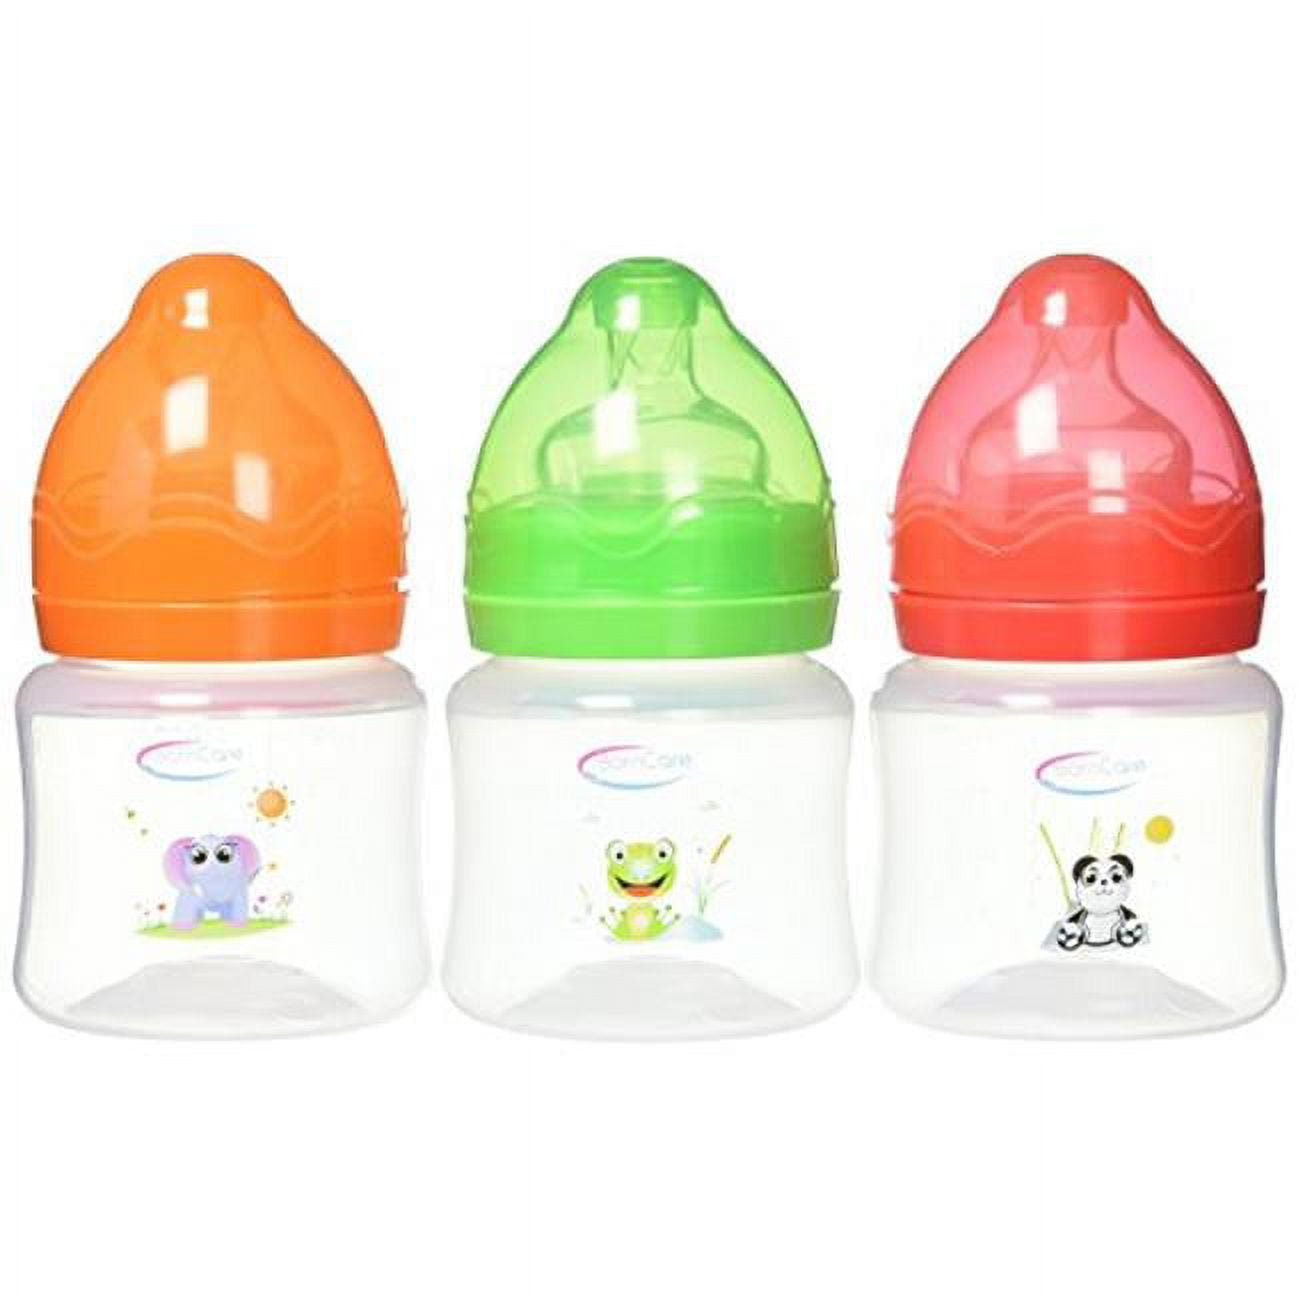 Bcws-162-3 4oz 125ml Wide Neck Feeding Bottle With Silicone Nipple, Fast Flow - 3 Pack